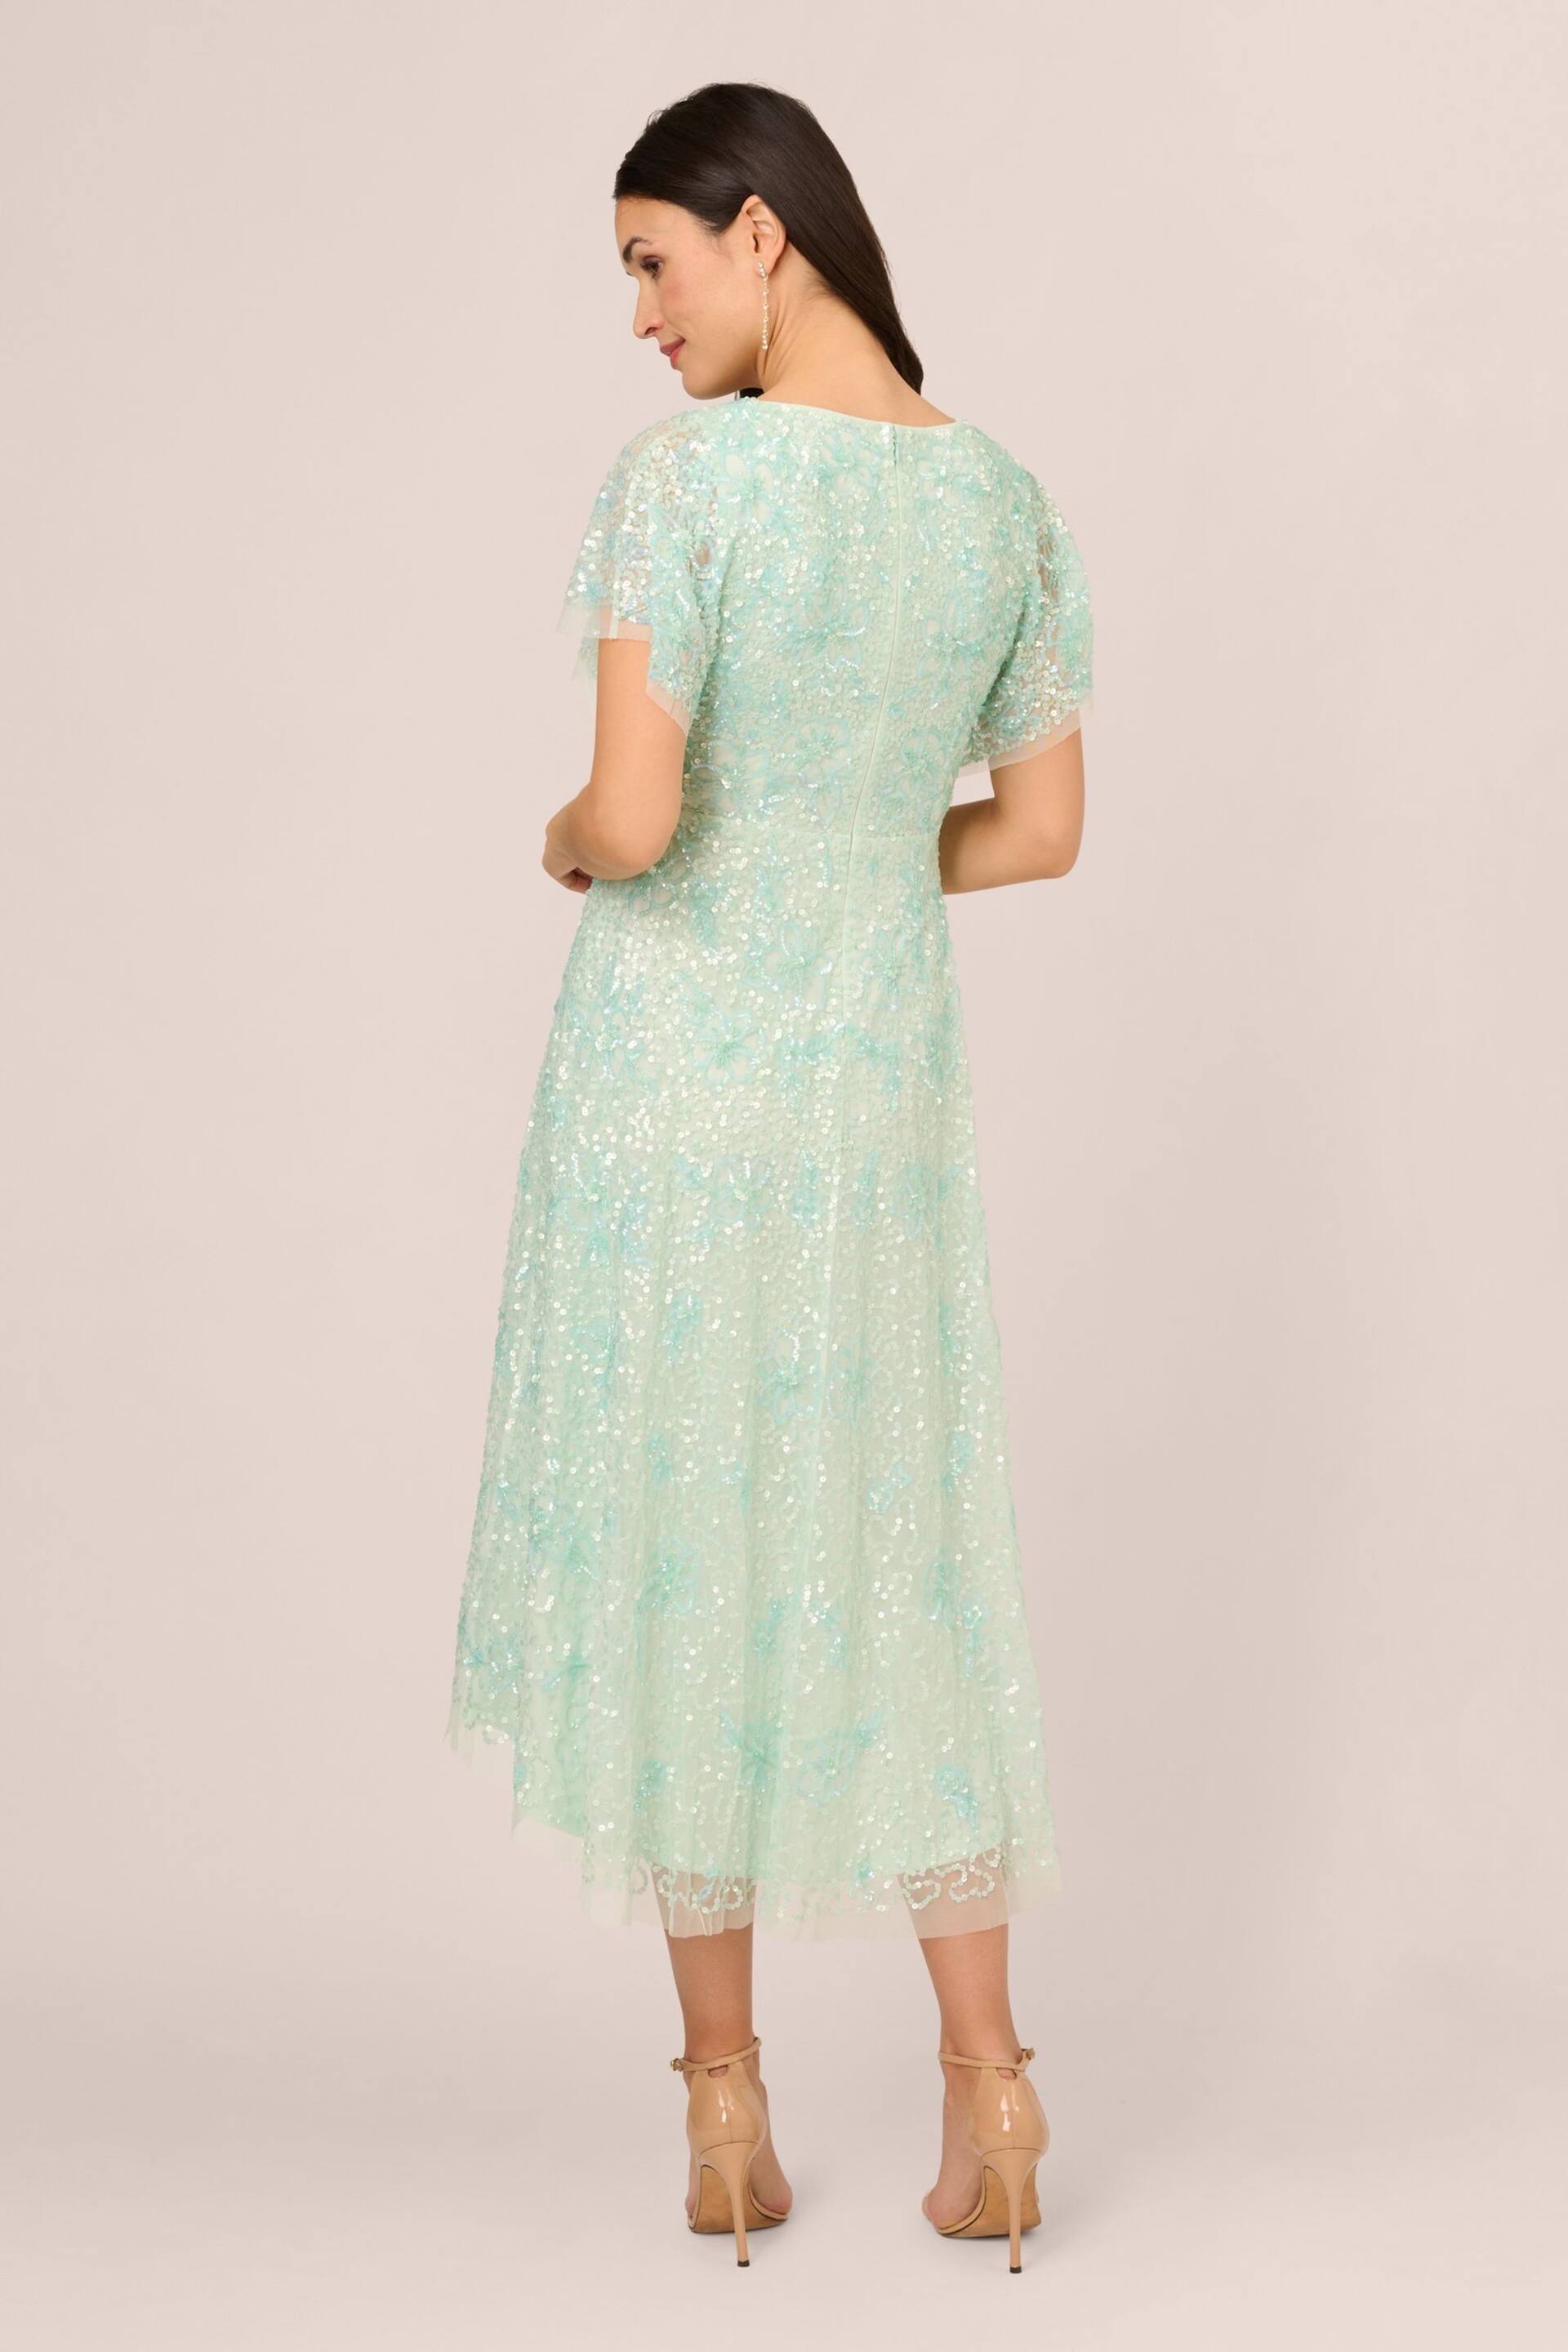 Adrianna Papell Green Beaded Mesh Wrap Dress - Image 2 of 7